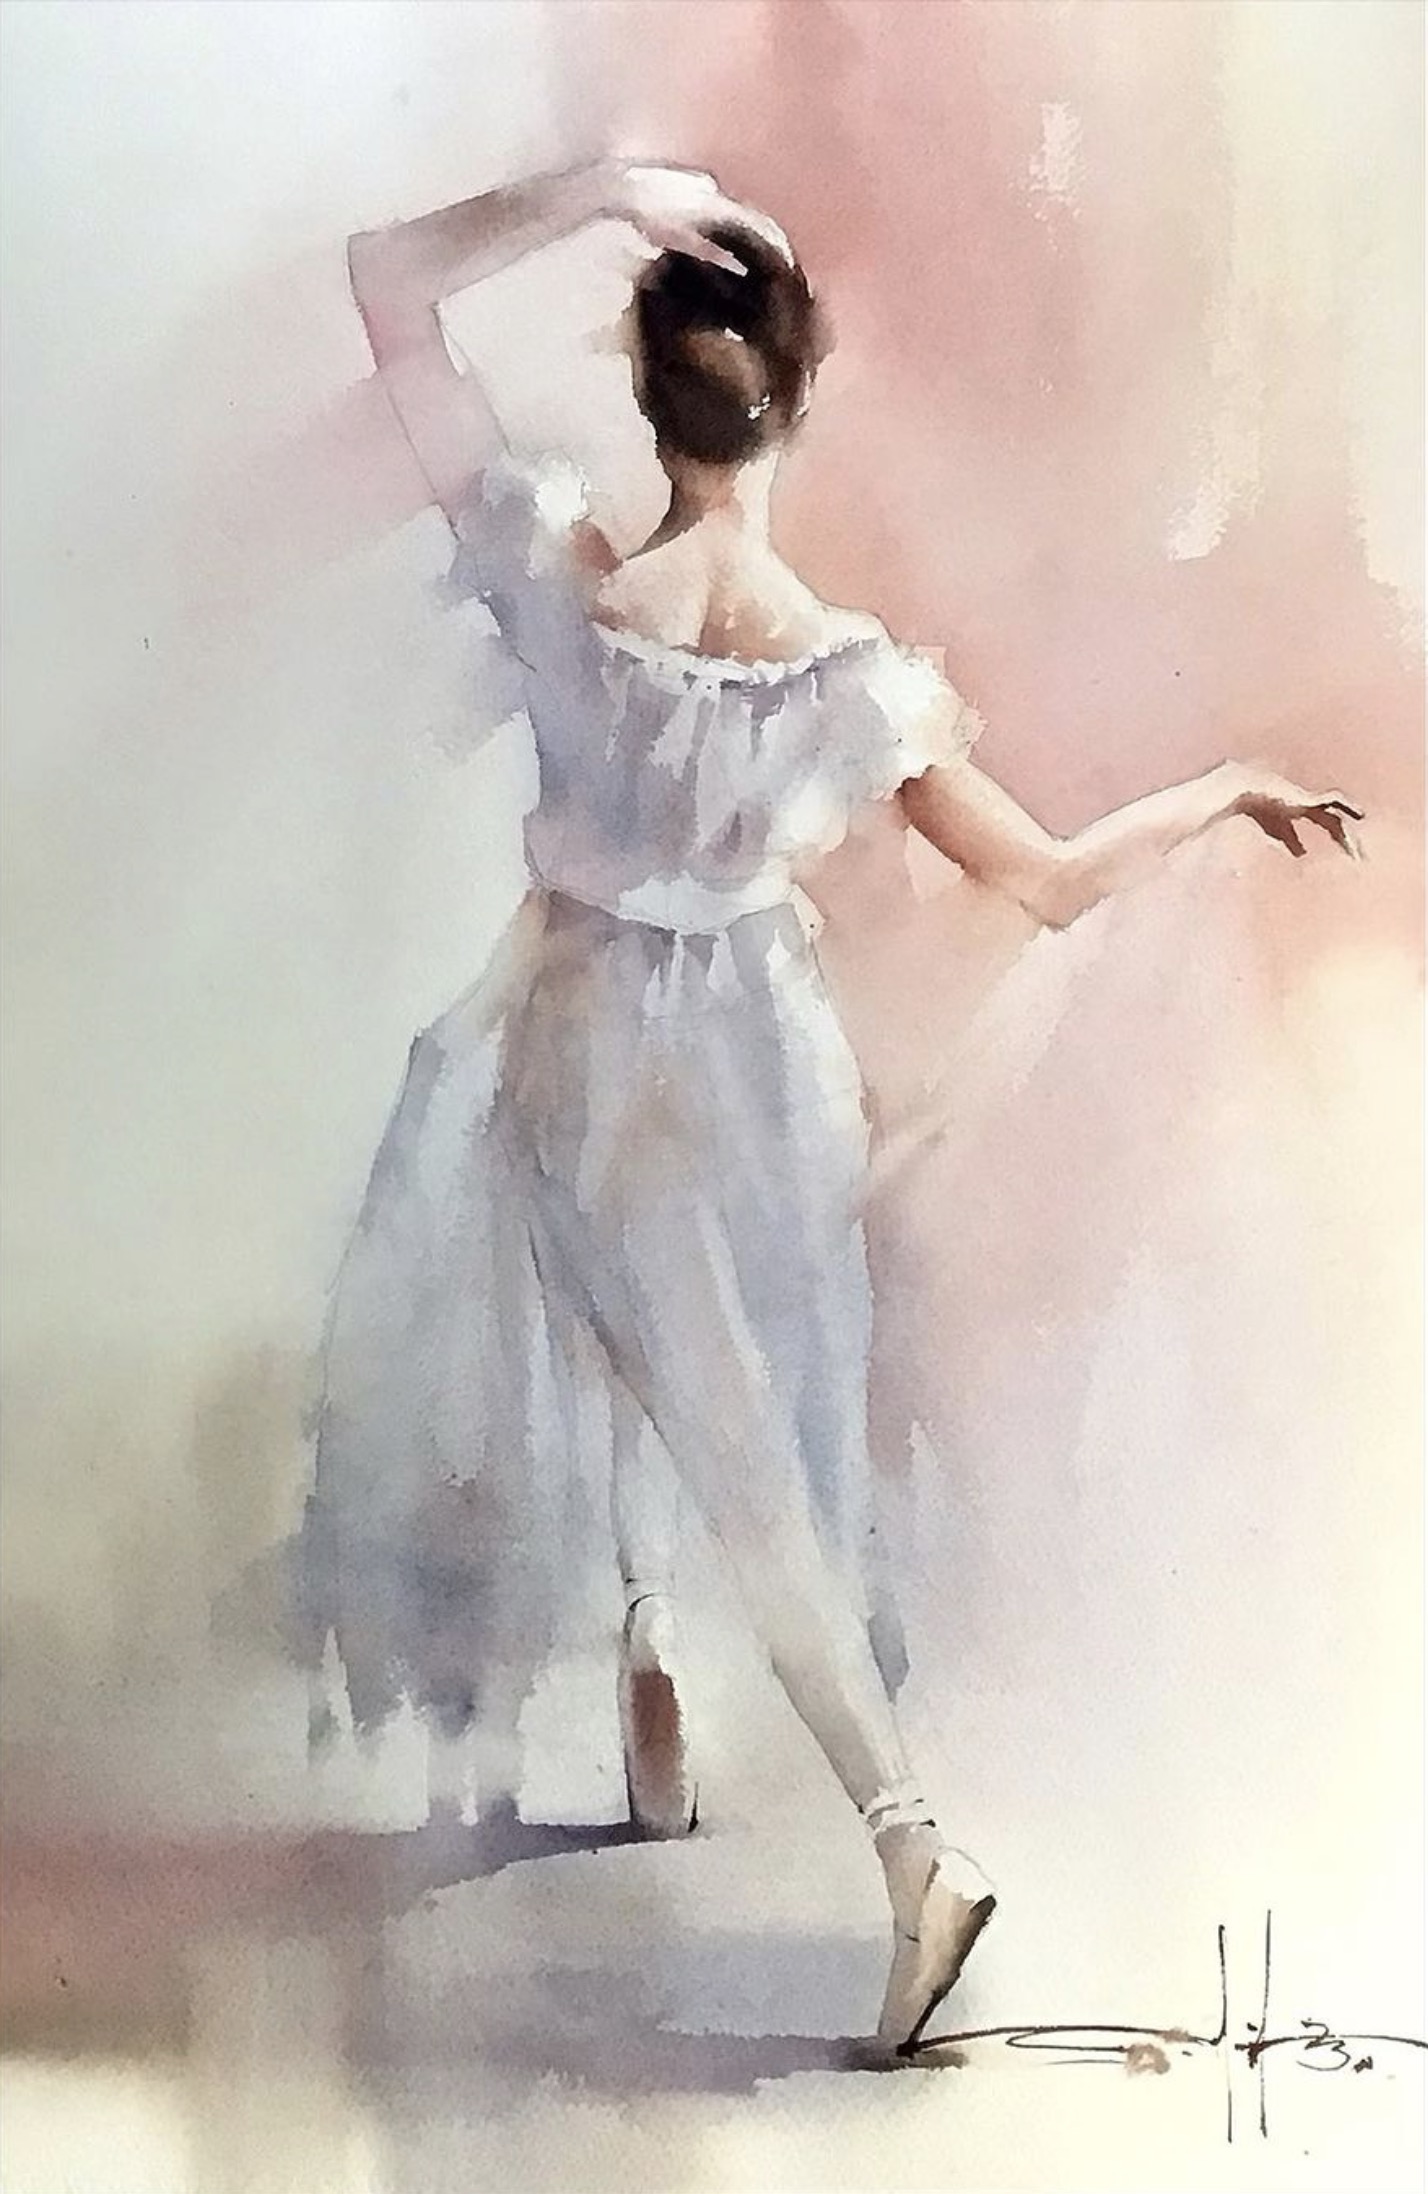 Watercolour painting of a ballerina.  She has her back to the viewer and is mid step, with her left arm gracefully arched over her head